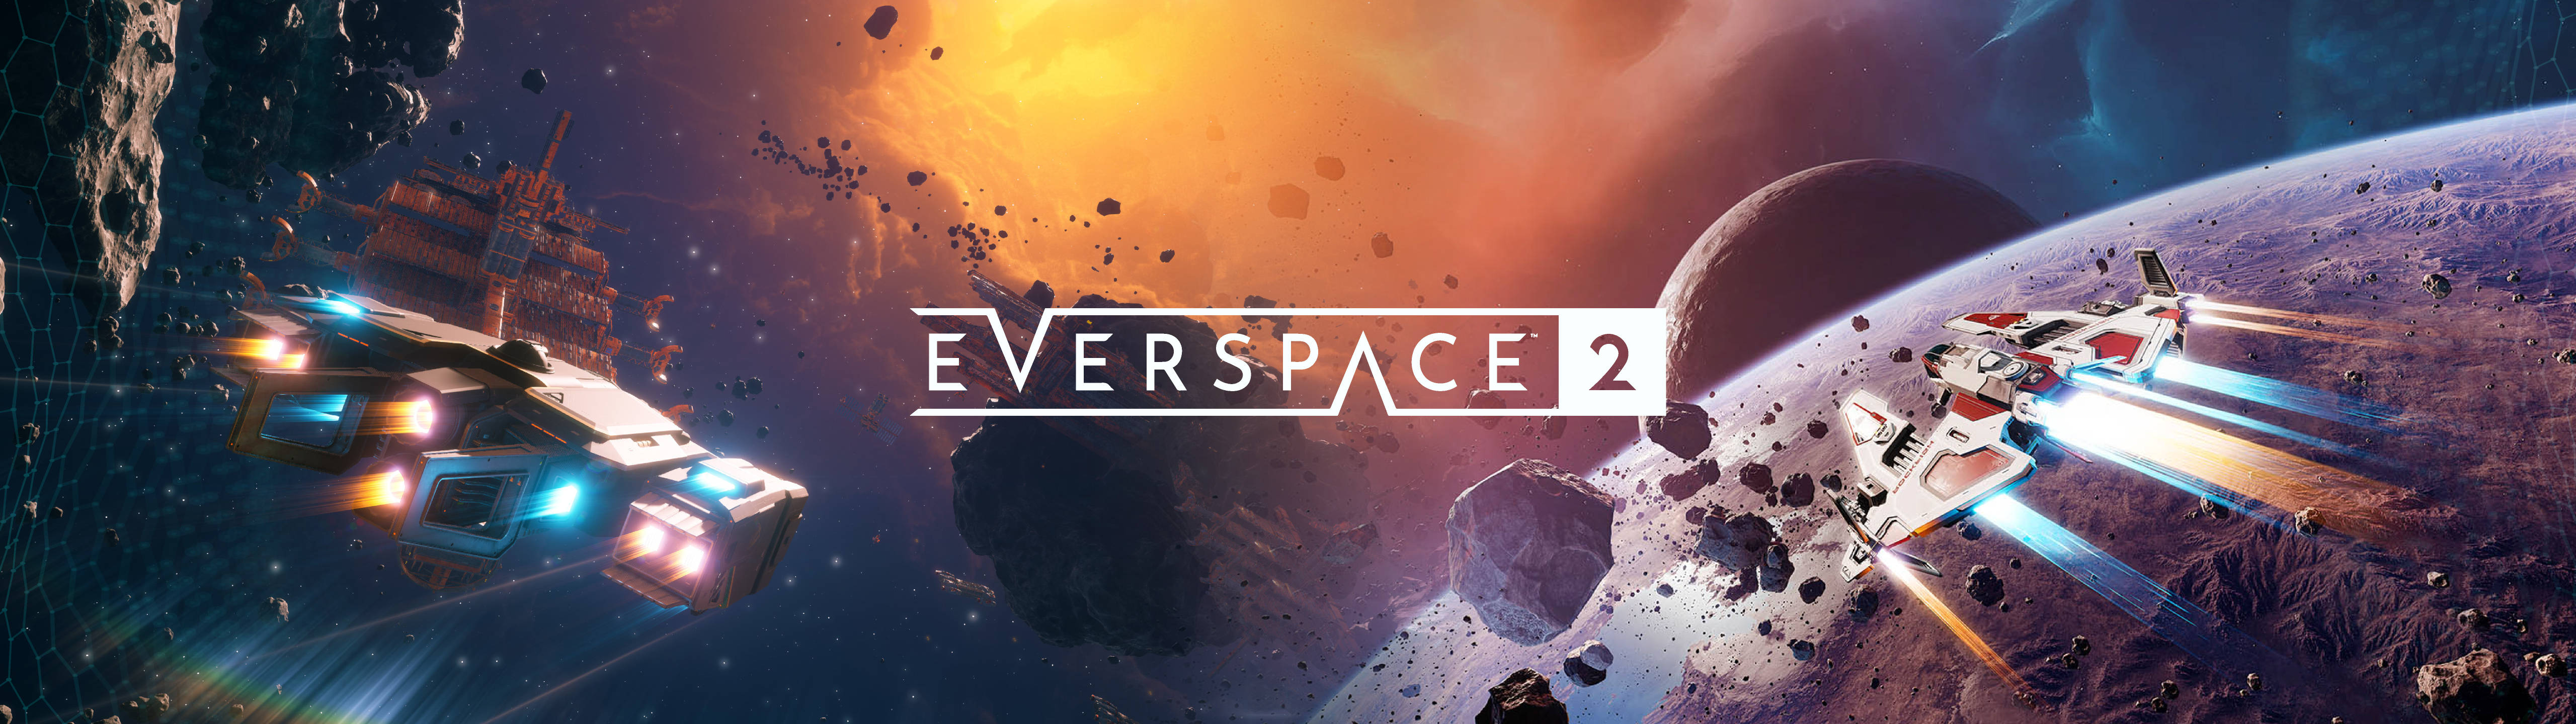 Everspace 2 5120x1440 Gaming Landscape Background